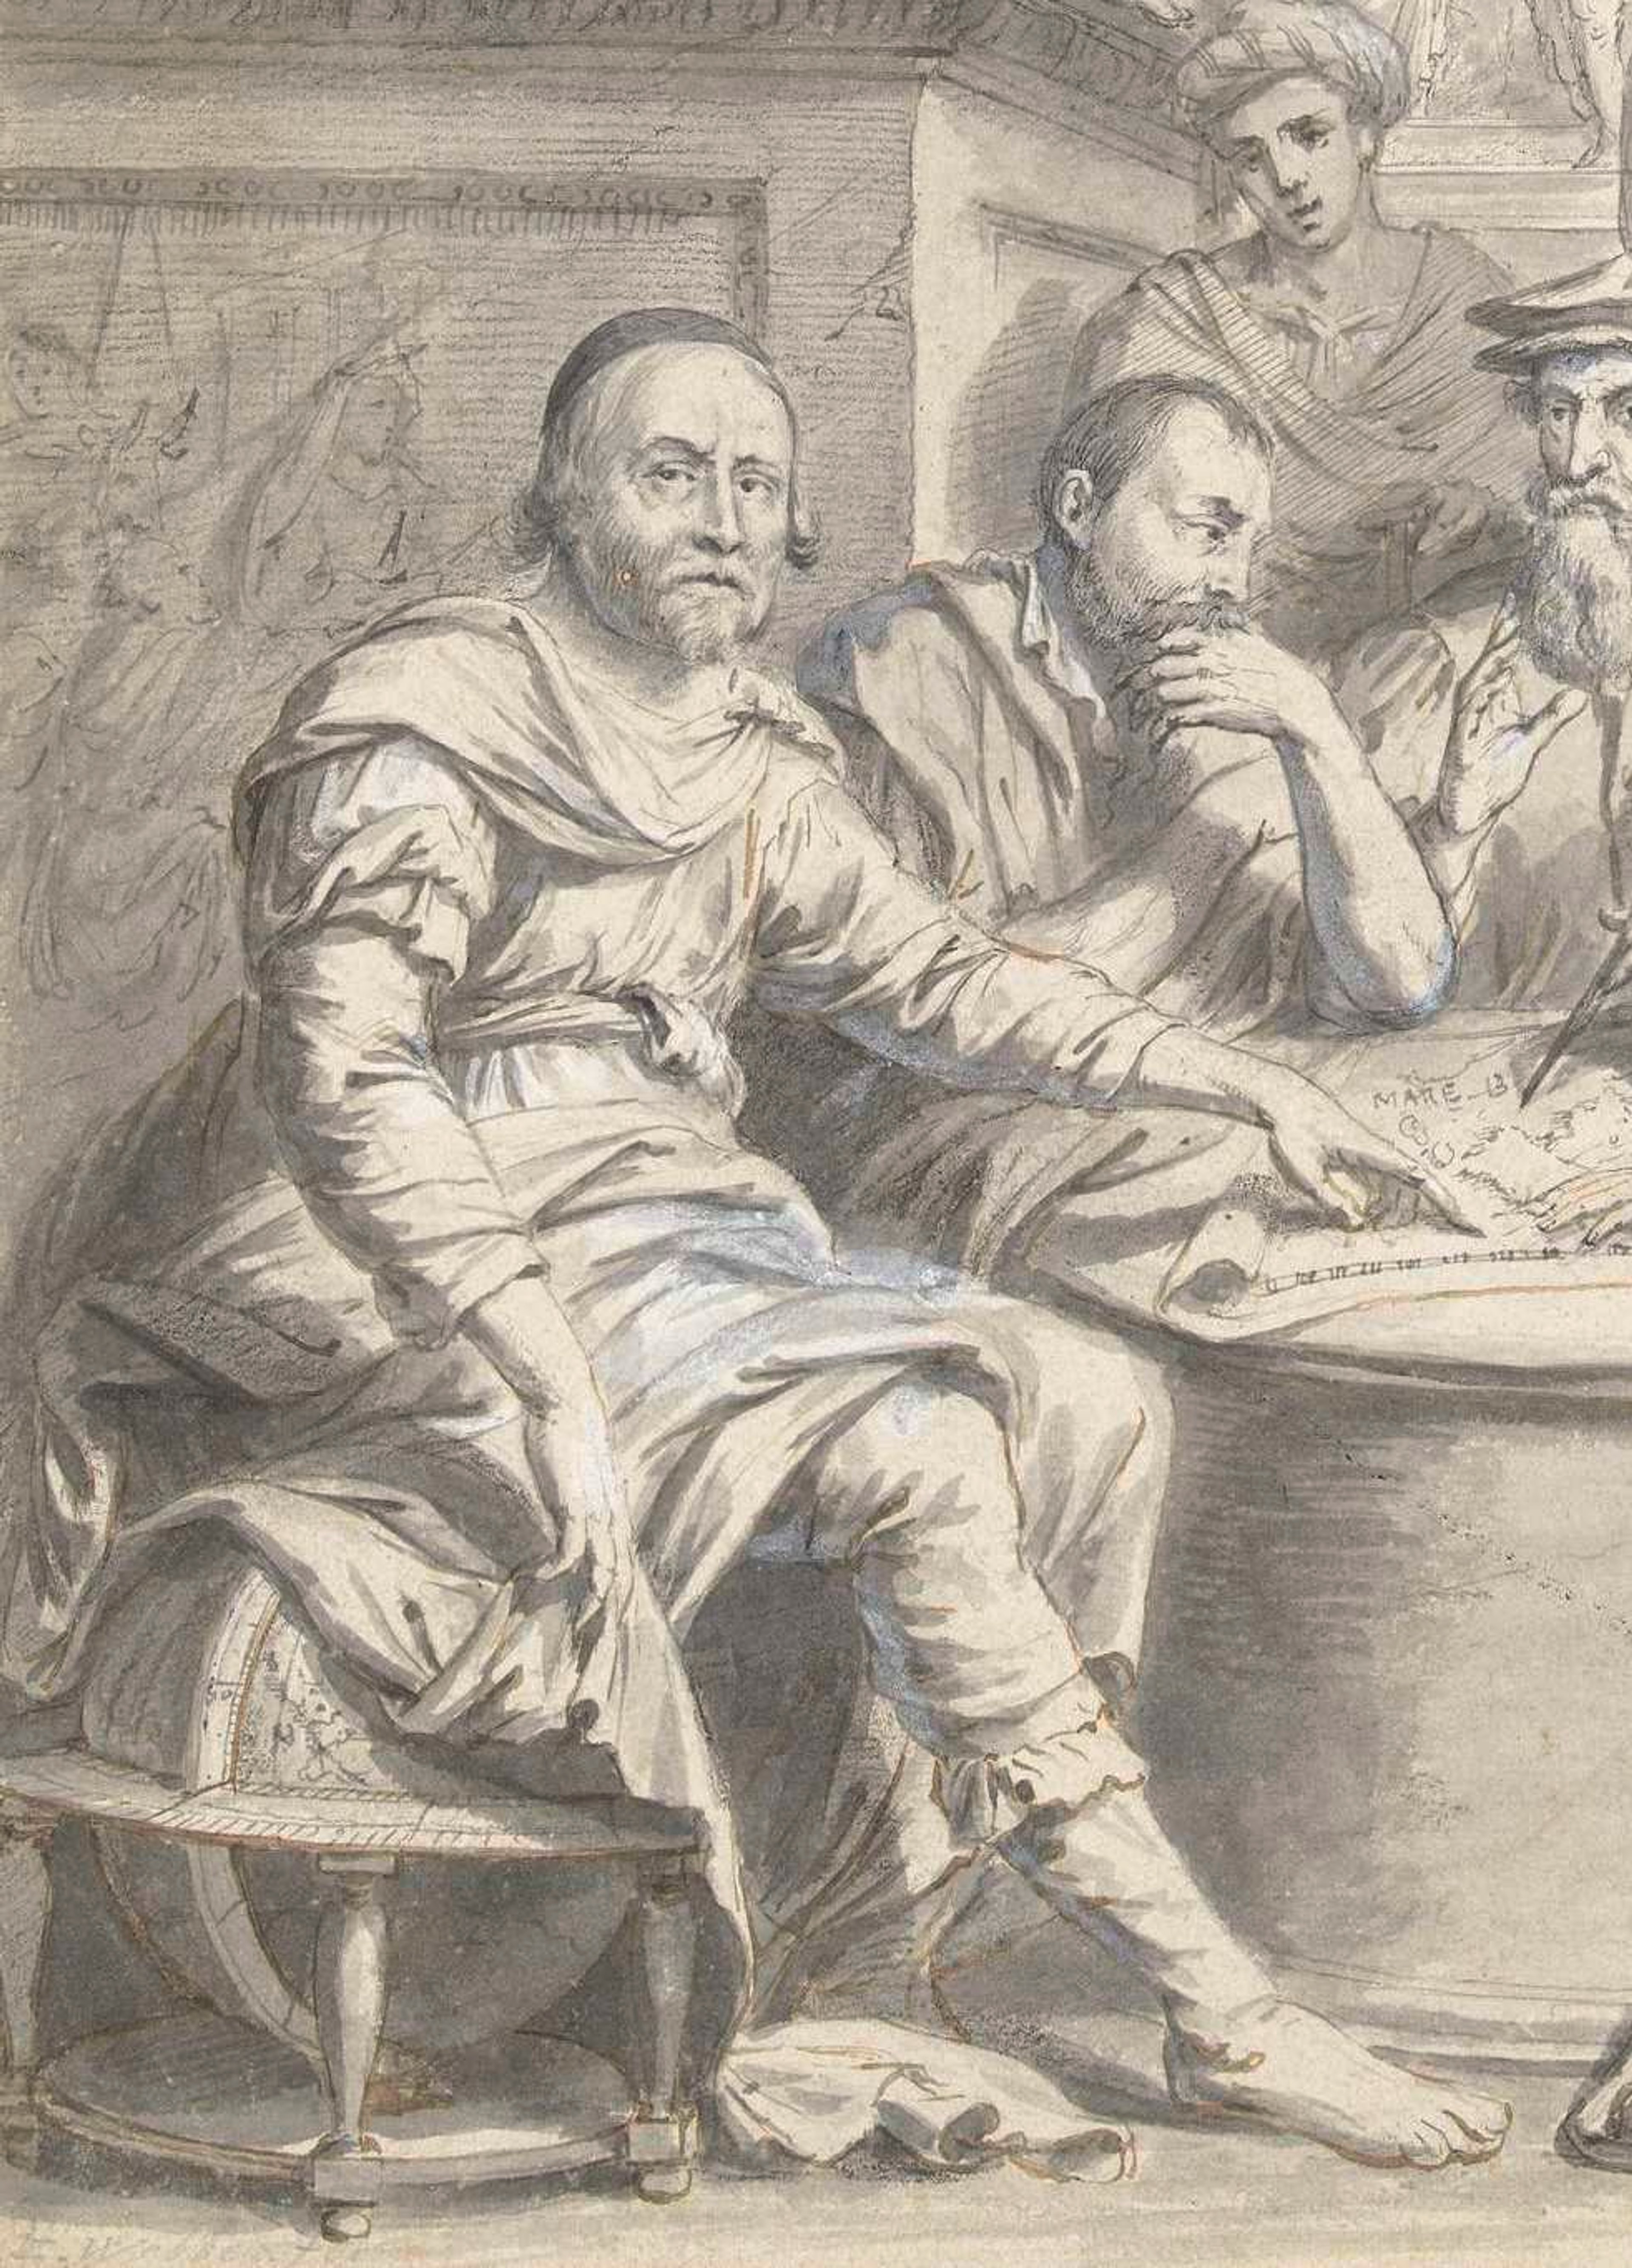 Black and white full body portrait of Johannes Janssonius, a man with short hair and a beard. He's pointing at a map and lifting his robe to reveal a globe beside him. In the background, there are other people talking at a table.